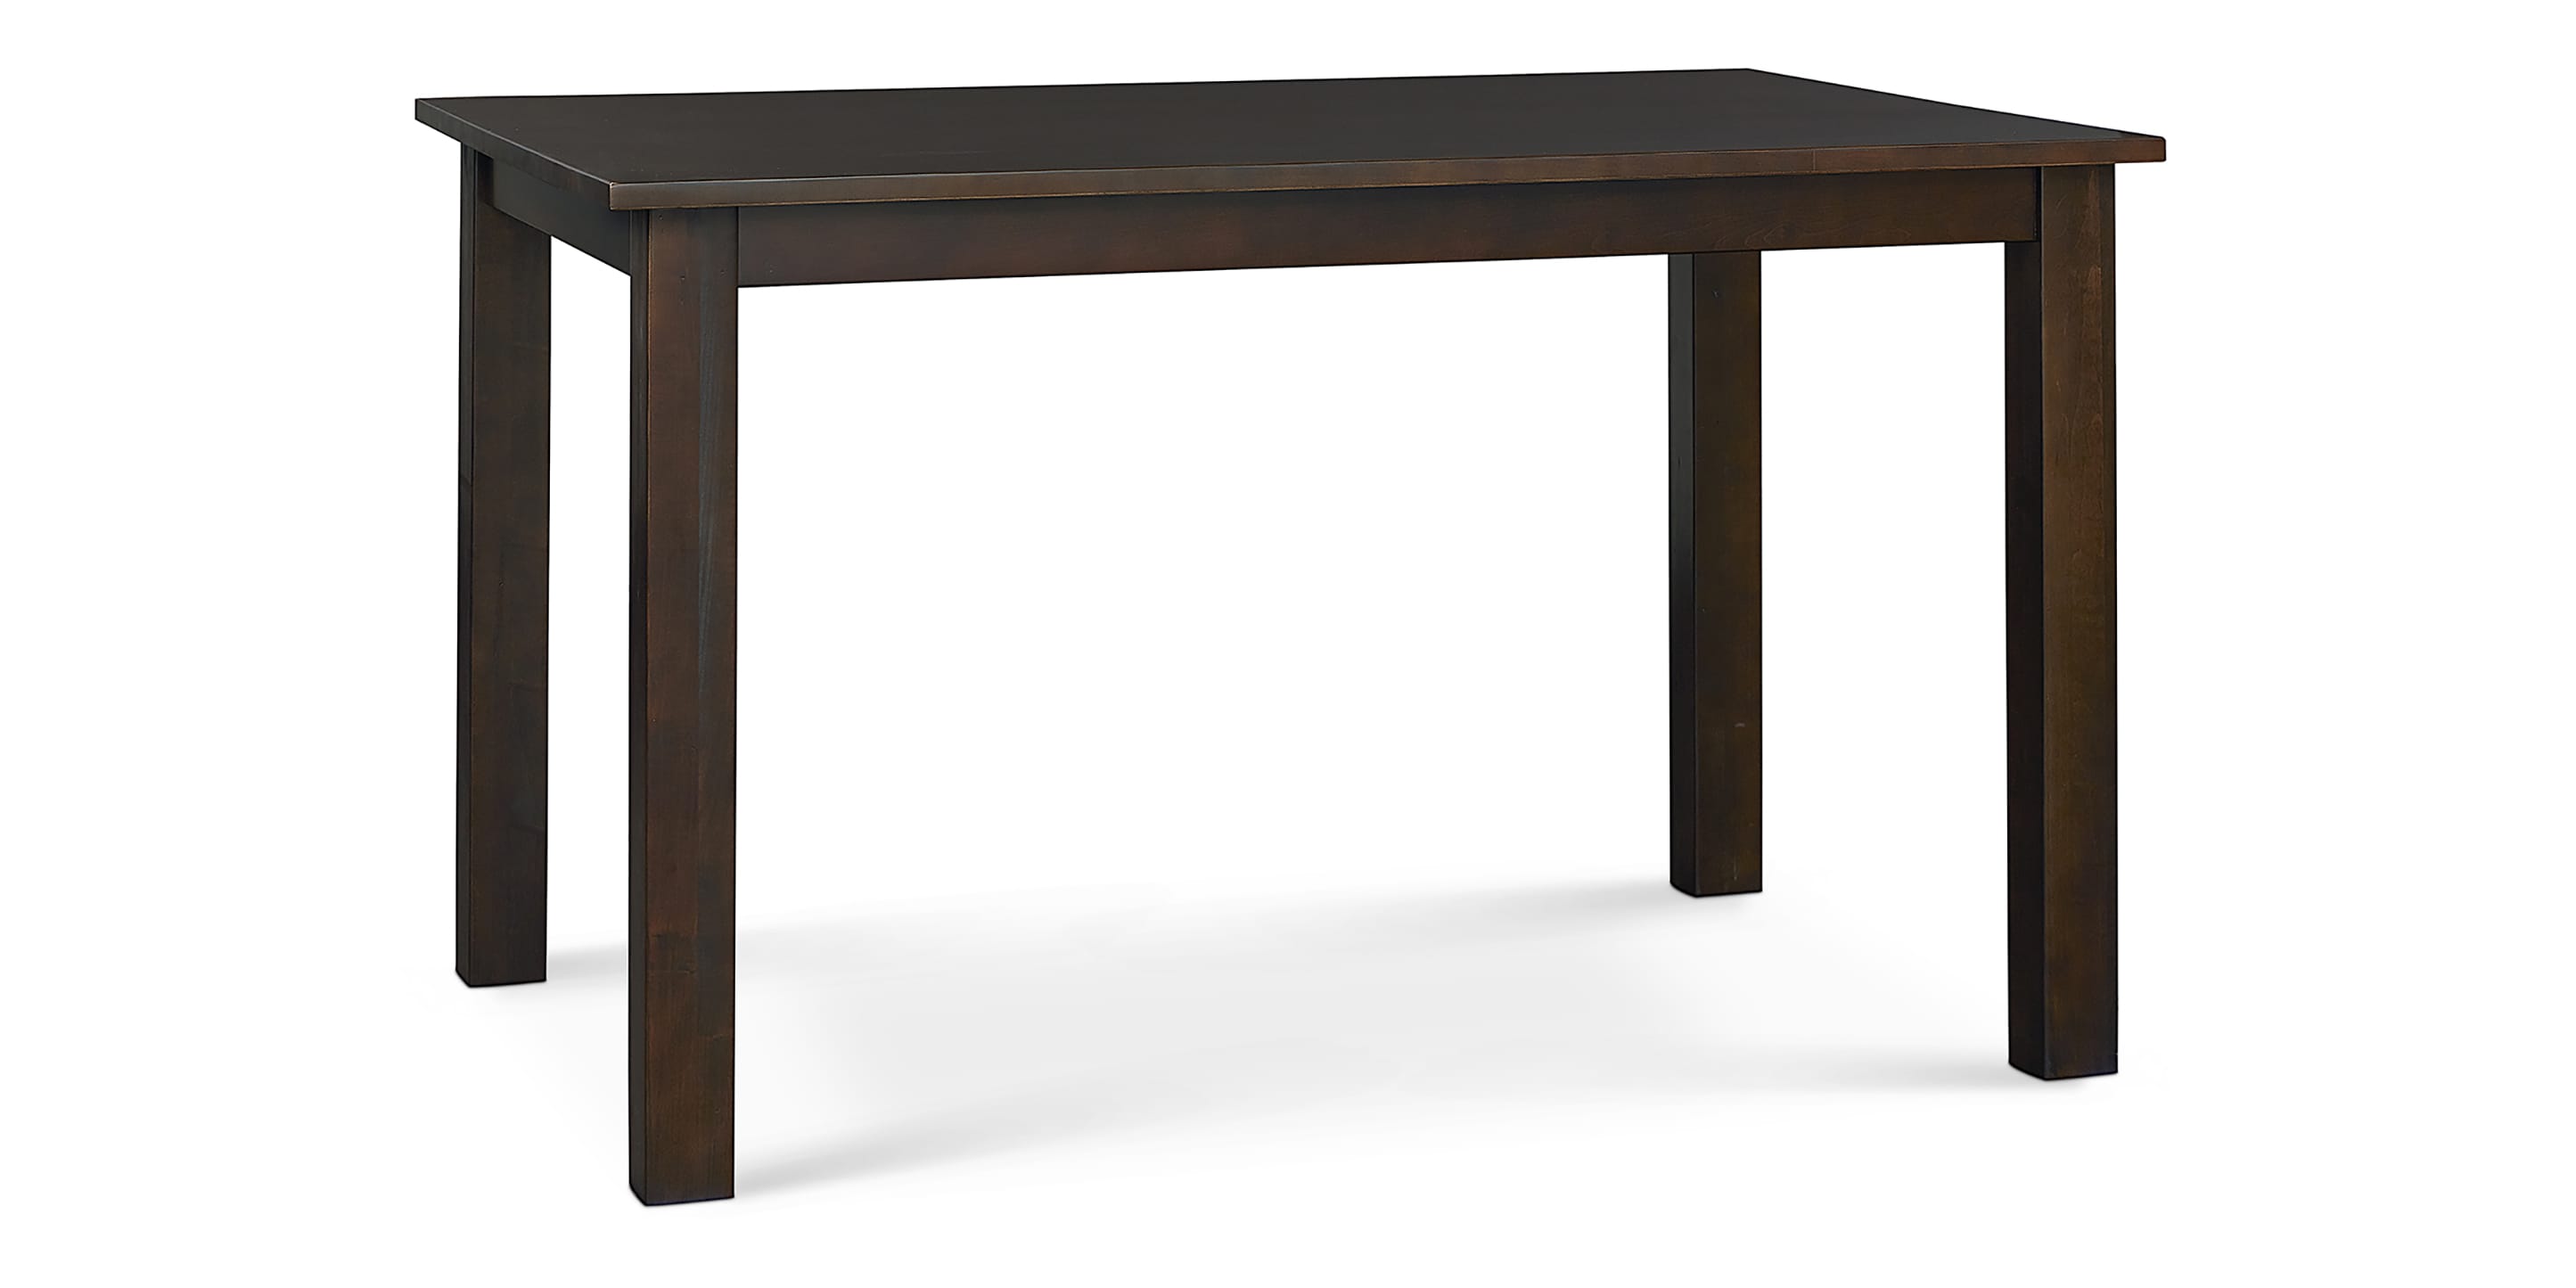 Selwyn Counter Dining Table